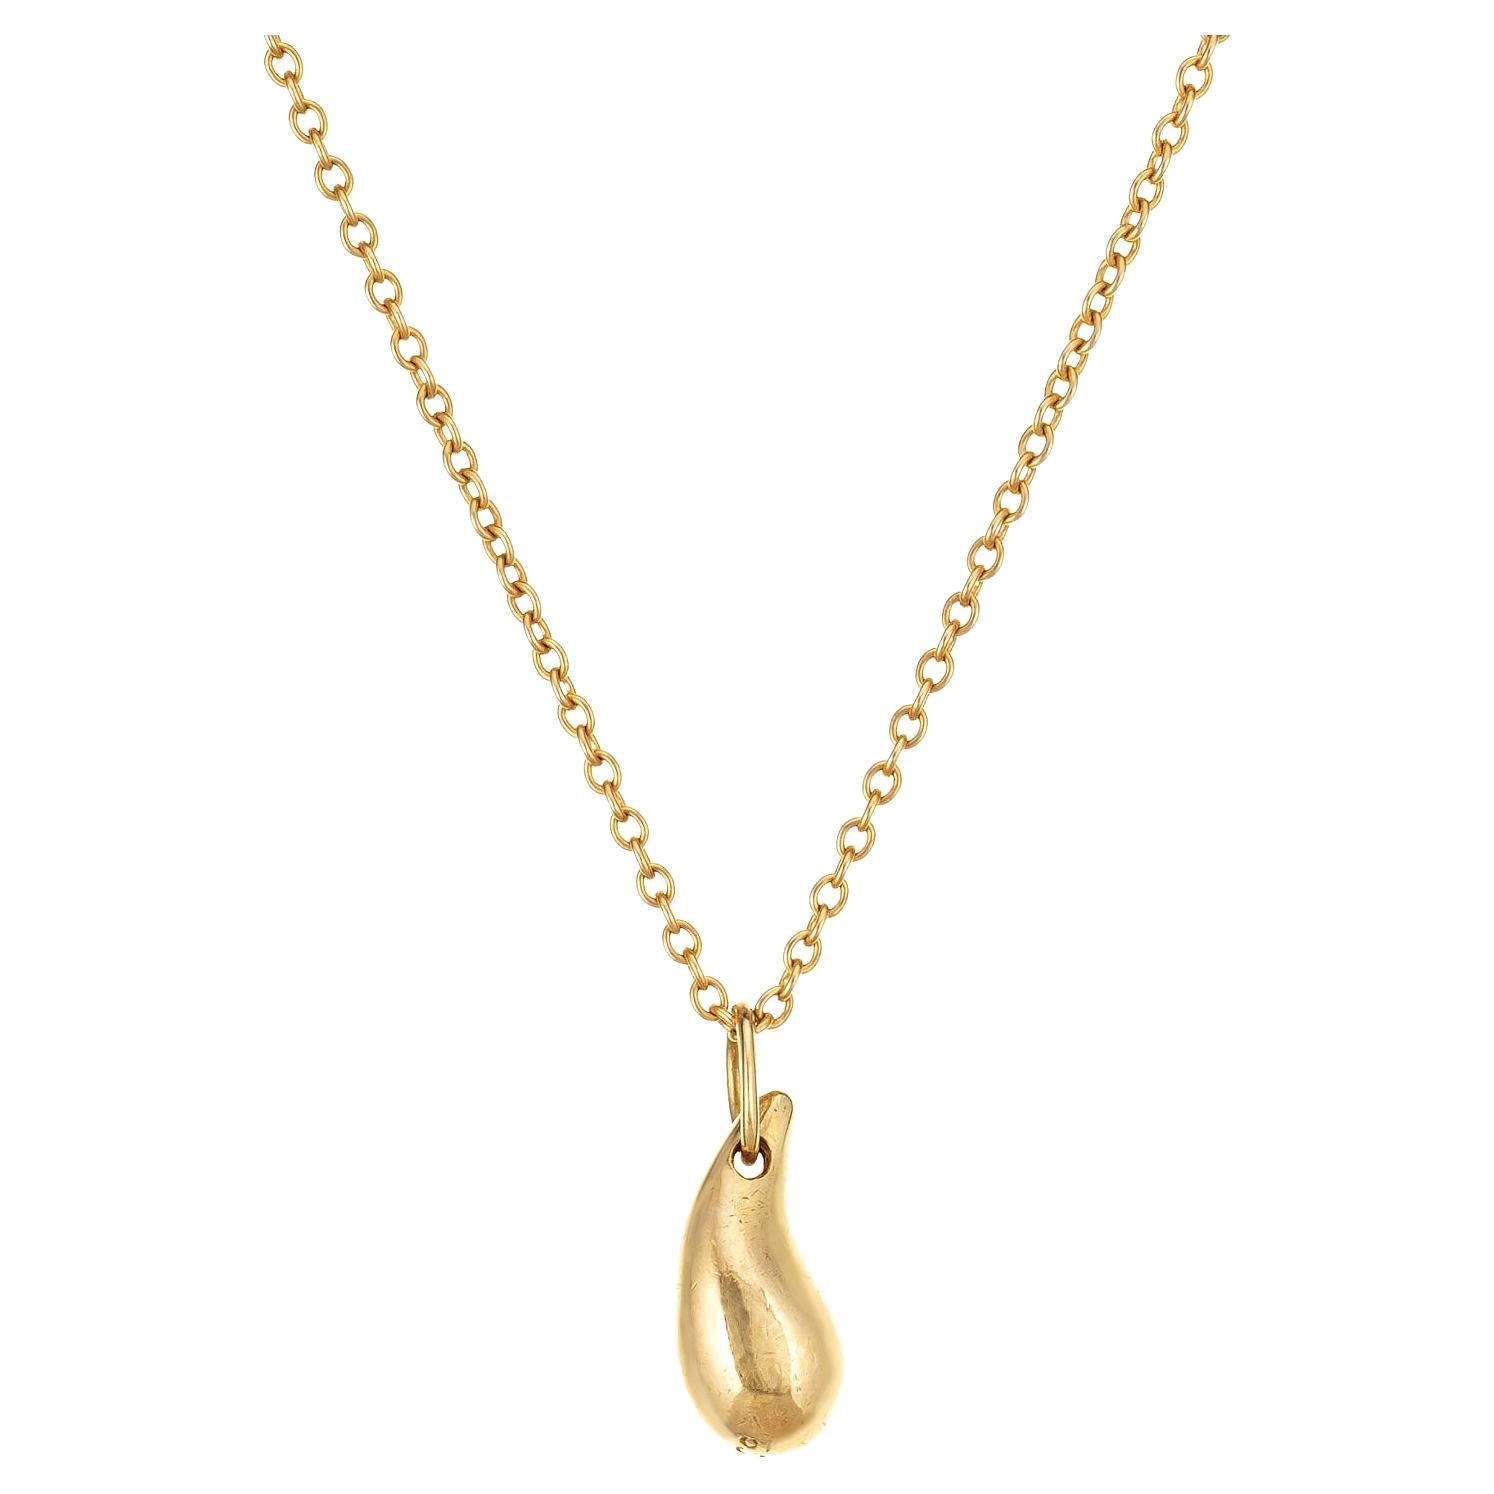 Vintage Tiffany & Co Teardrop Necklace Elsa Peretti 18k Yellow Gold 16.5" For Sale